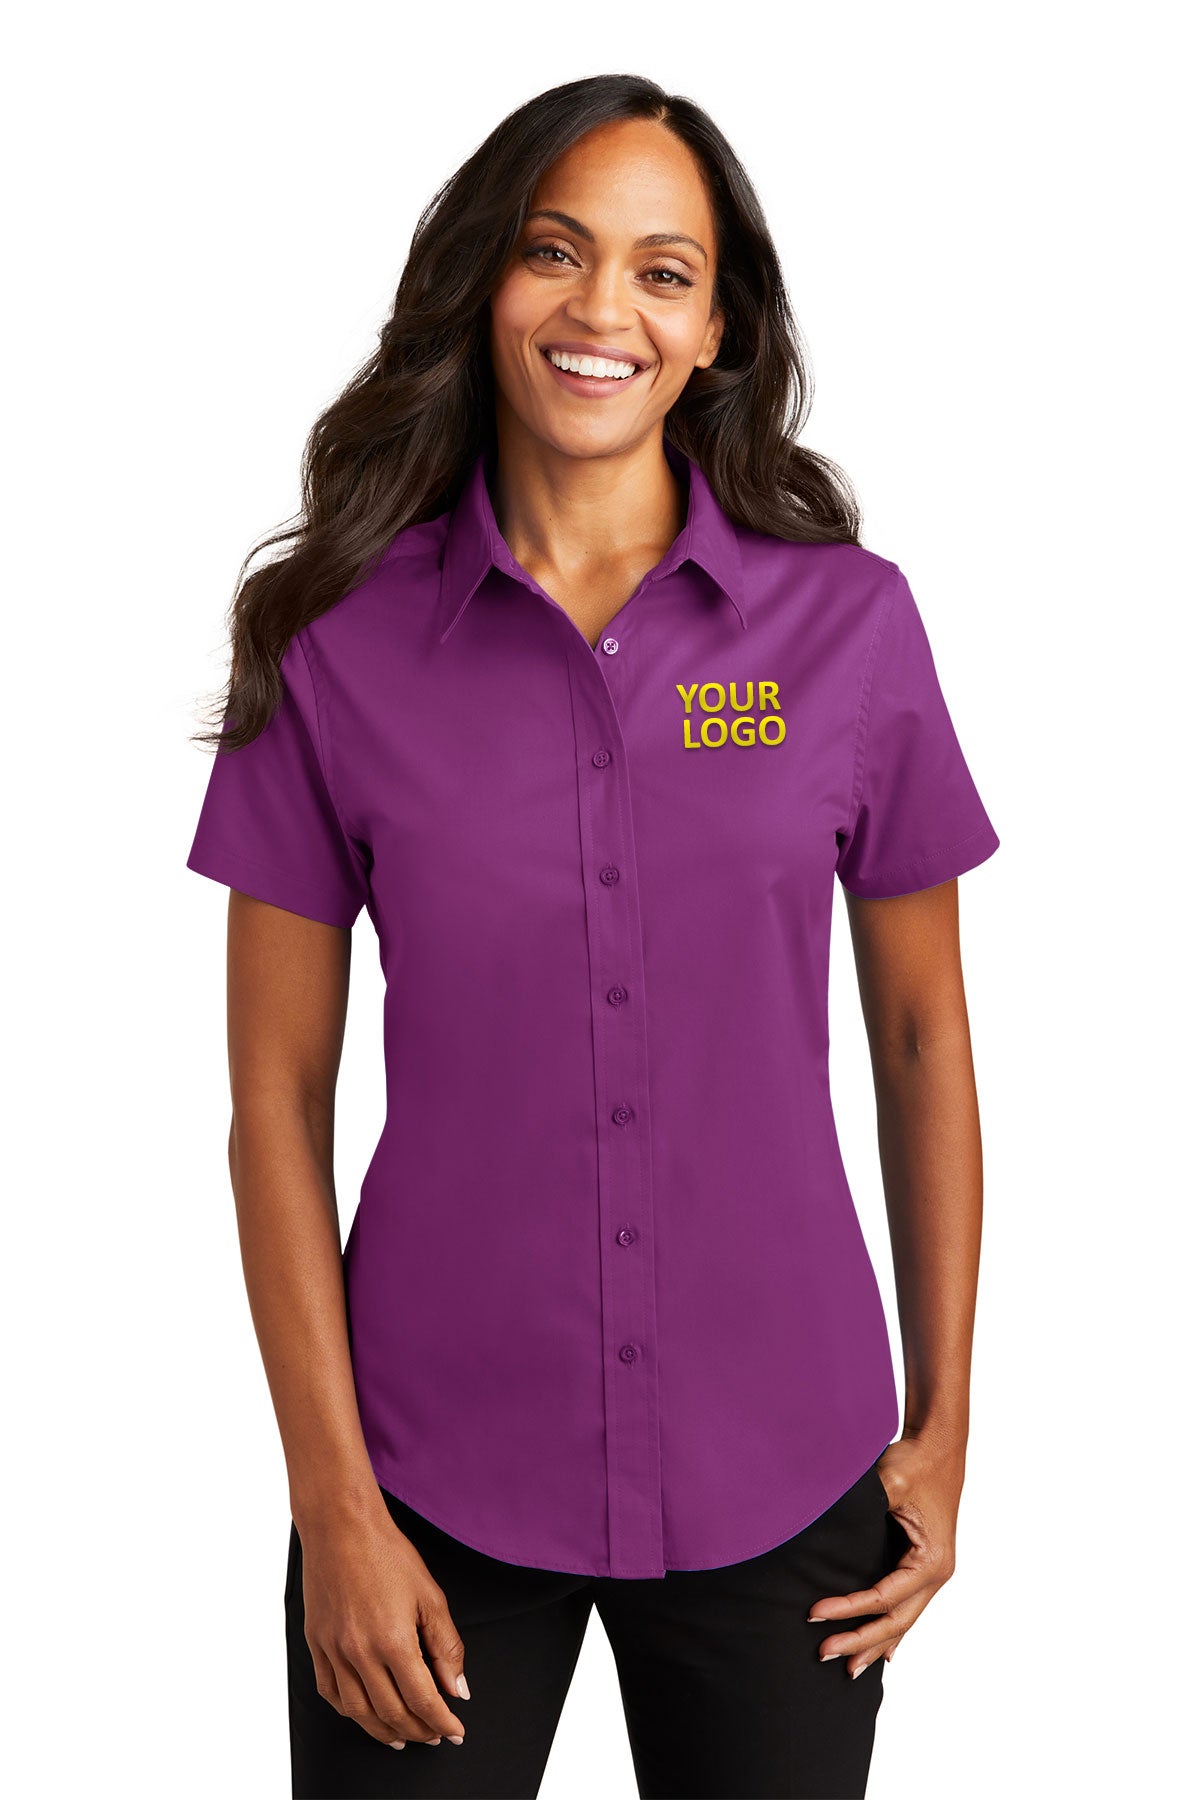 Port Authority Deep Berry L508 order embroidered polo shirts